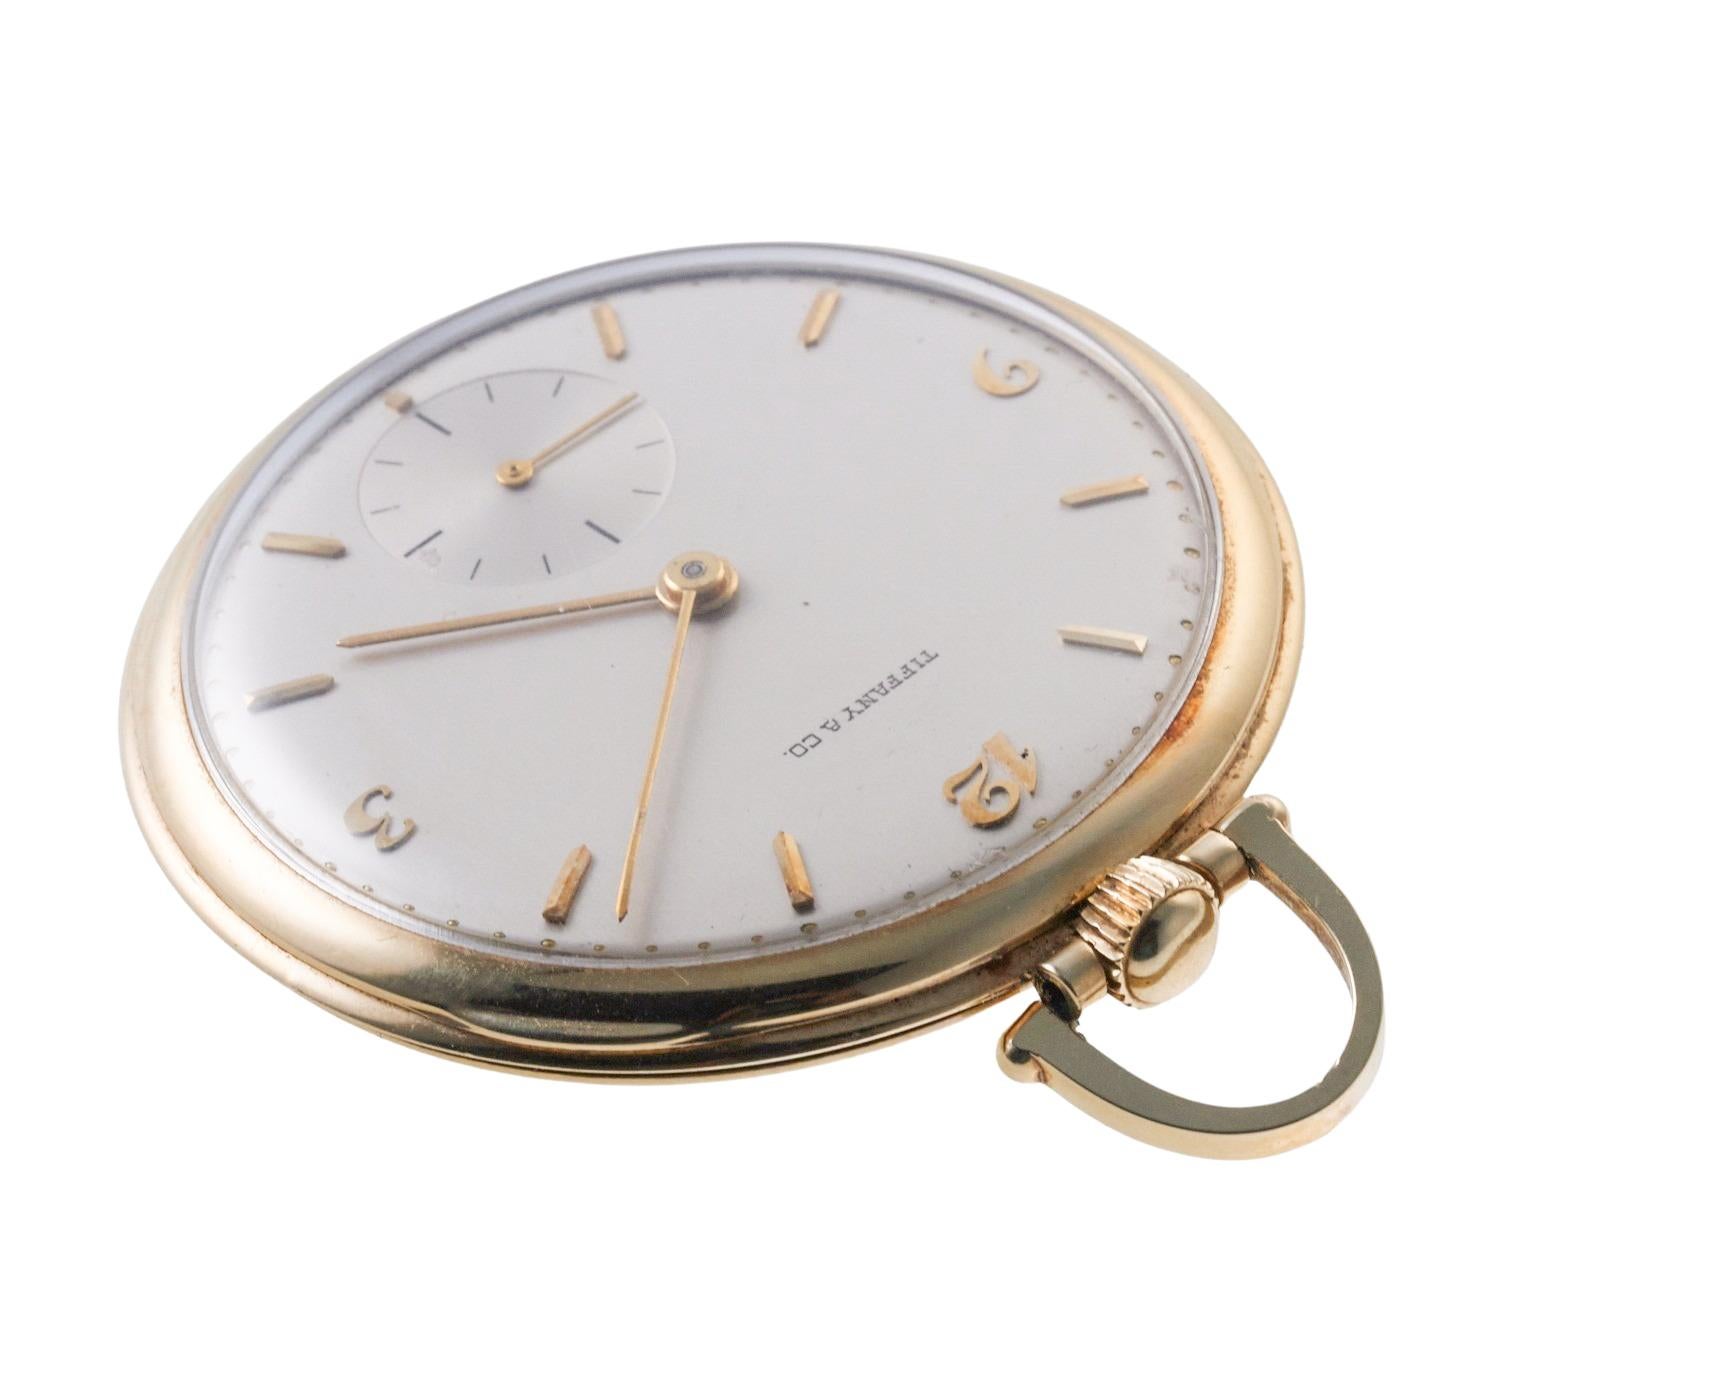 Tiffany & Co Movado Gold Pocket Watch For Sale 5